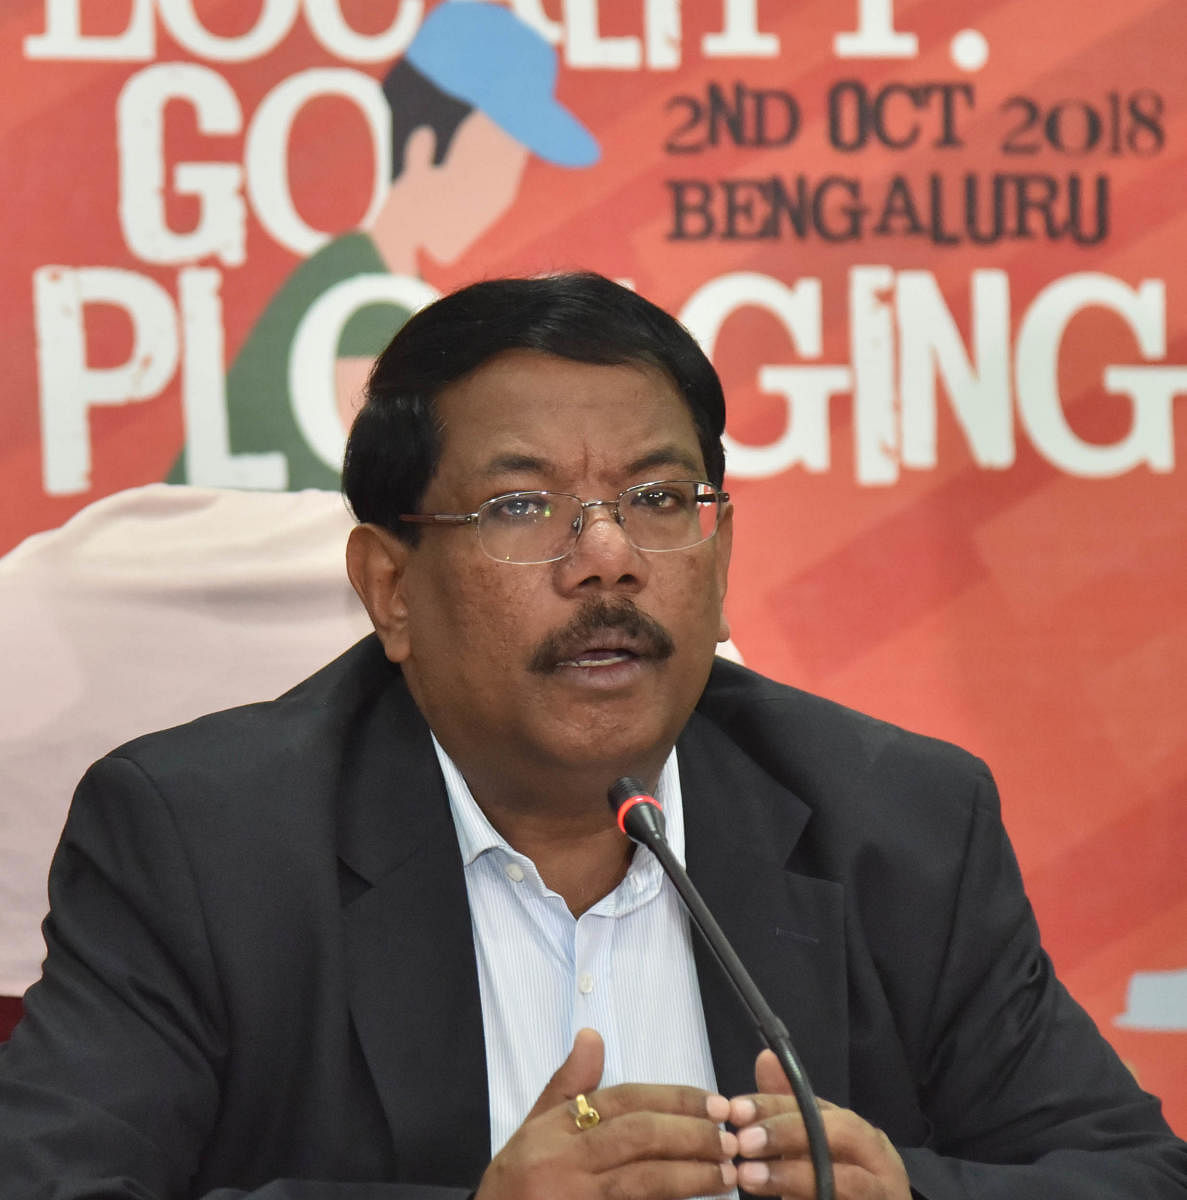 BBMP Commissioner N Manjunath Prasad said this is an initiative by the BBMP and few NGOs to create awareness among people to reduce the usage of single-use plastic. (DH Photo)